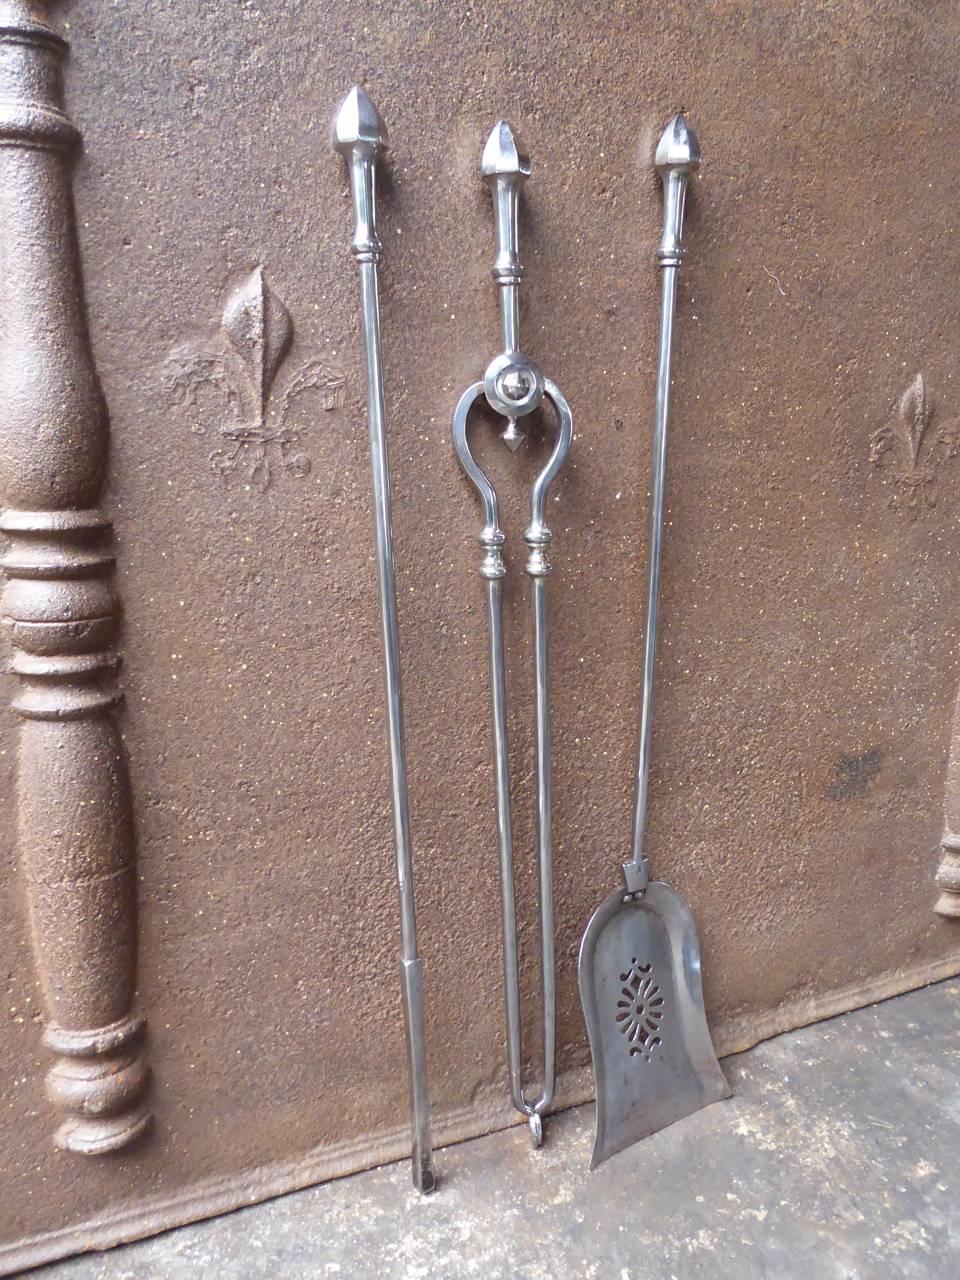 19th century English Victorian fireplace tool set made of polished steel.

We have a unique and specialized collection of antique and used fireplace accessories consisting of more than 1000 listings at 1stdibs. Amongst others, we always have 300+